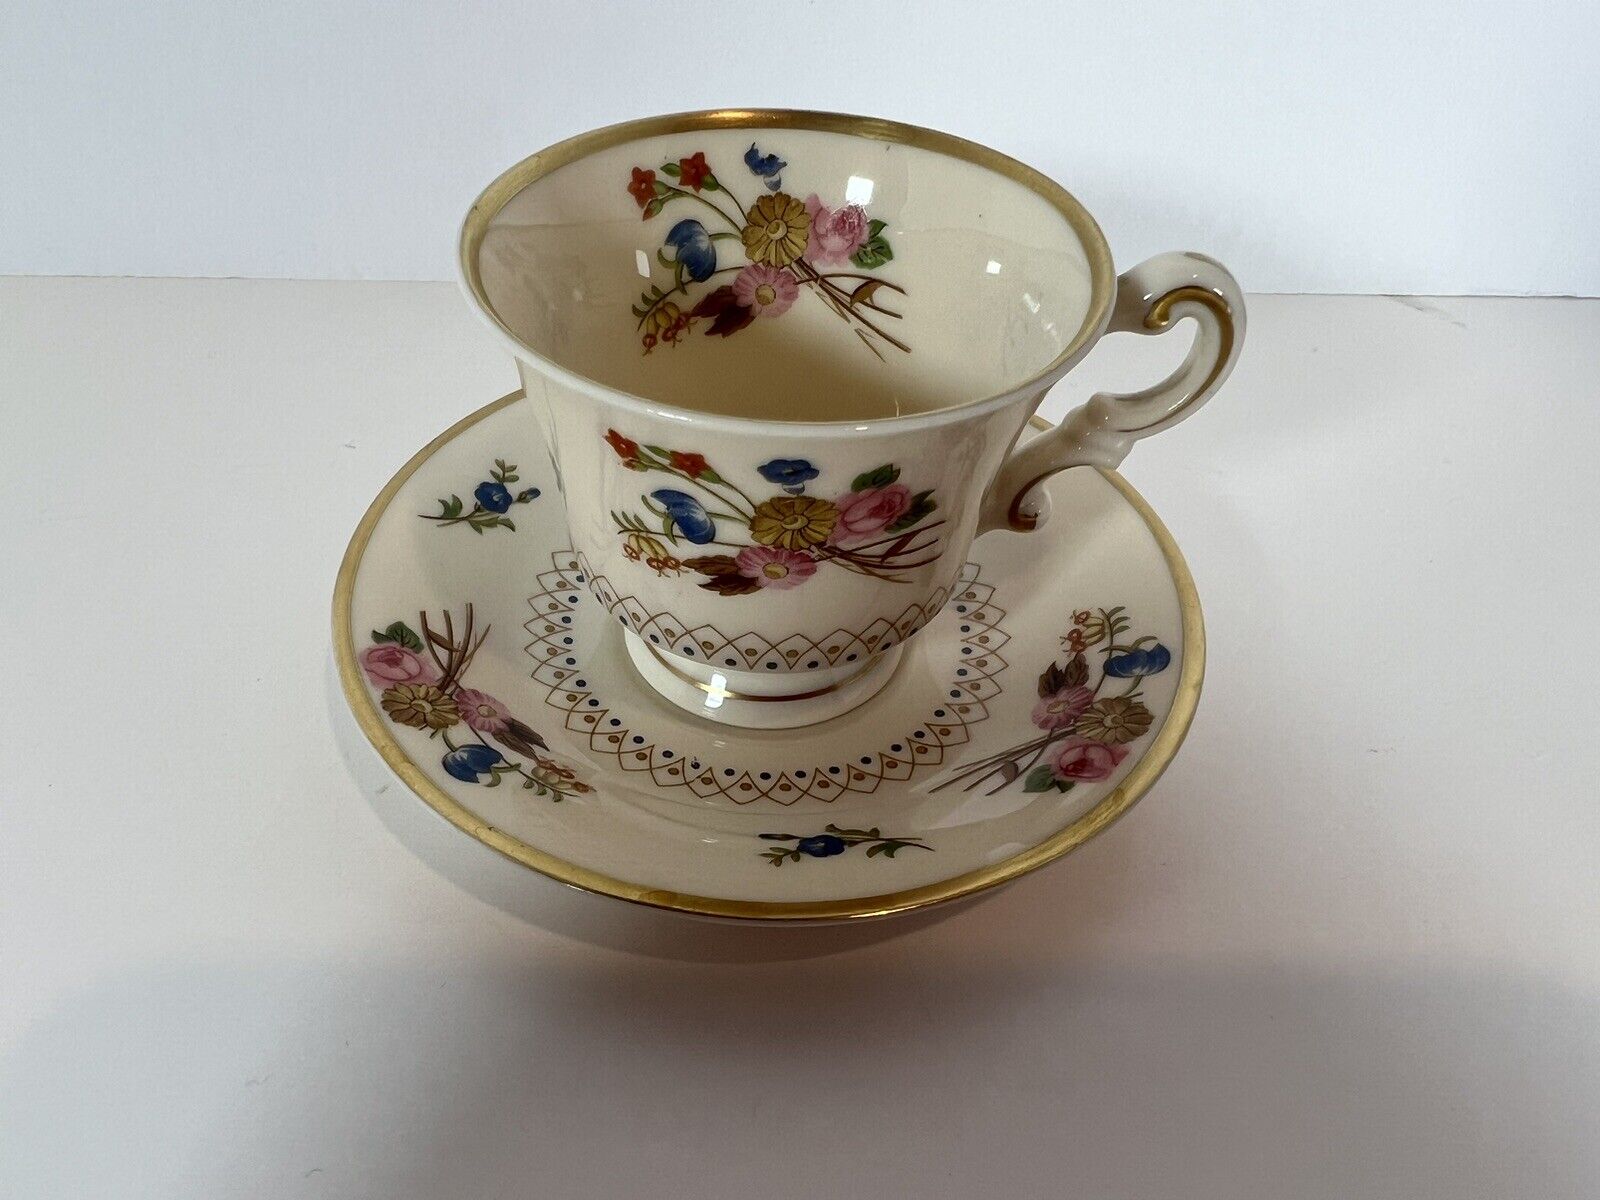 Vintage Syracuse Old Ivory ‘Coventry’ Tea Cup & Saucer Gold Rimmed Floral 1950